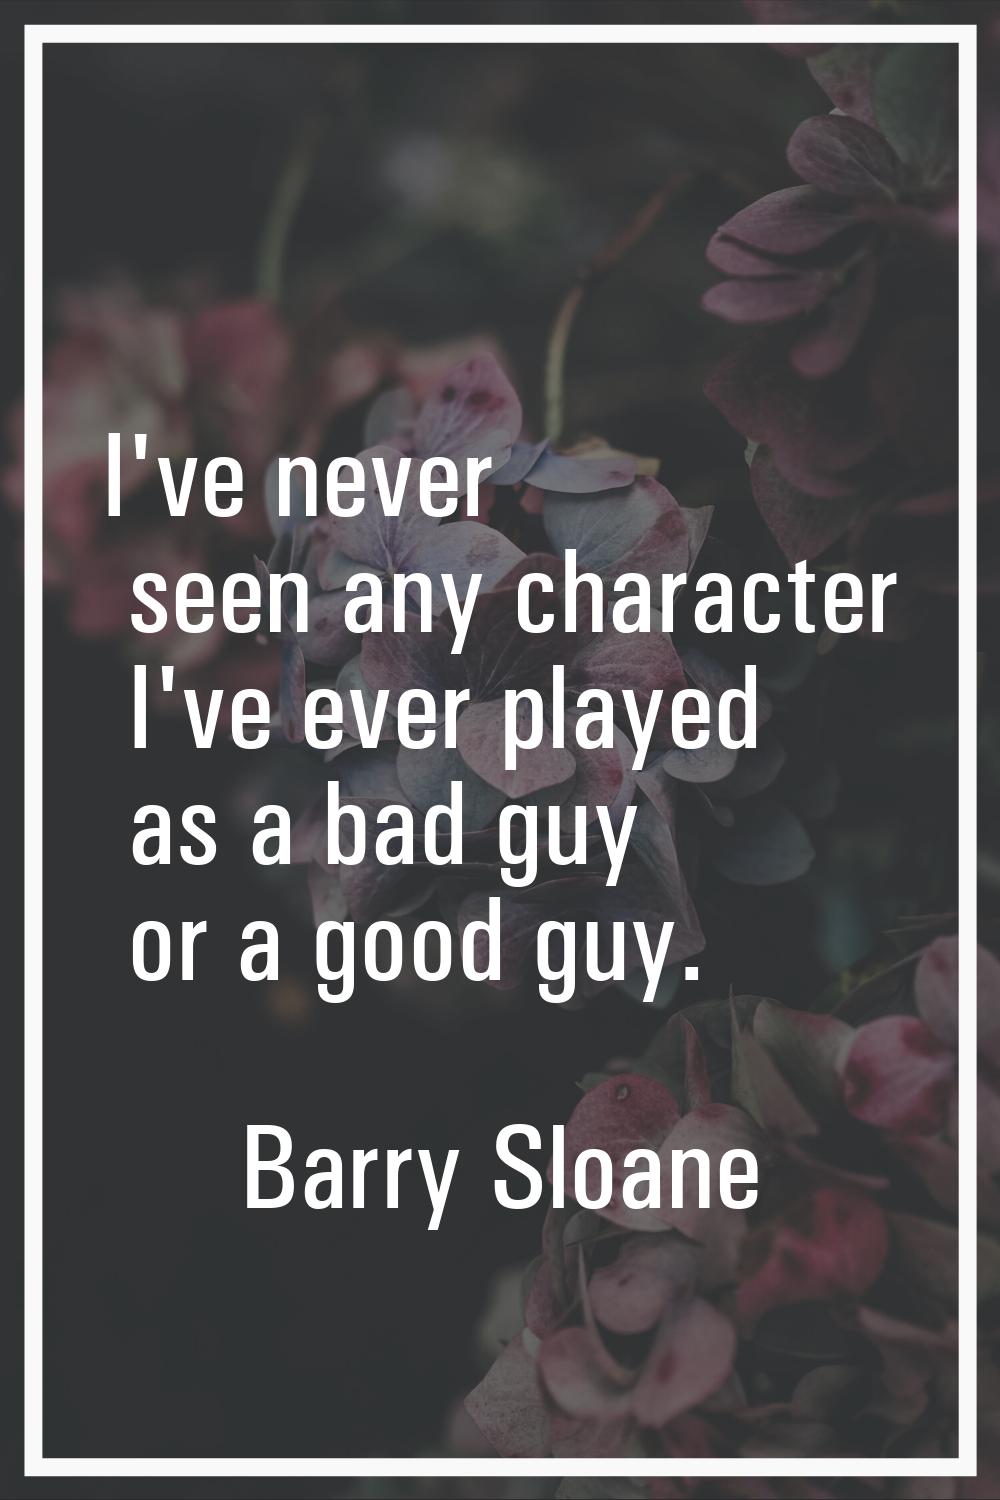 I've never seen any character I've ever played as a bad guy or a good guy.